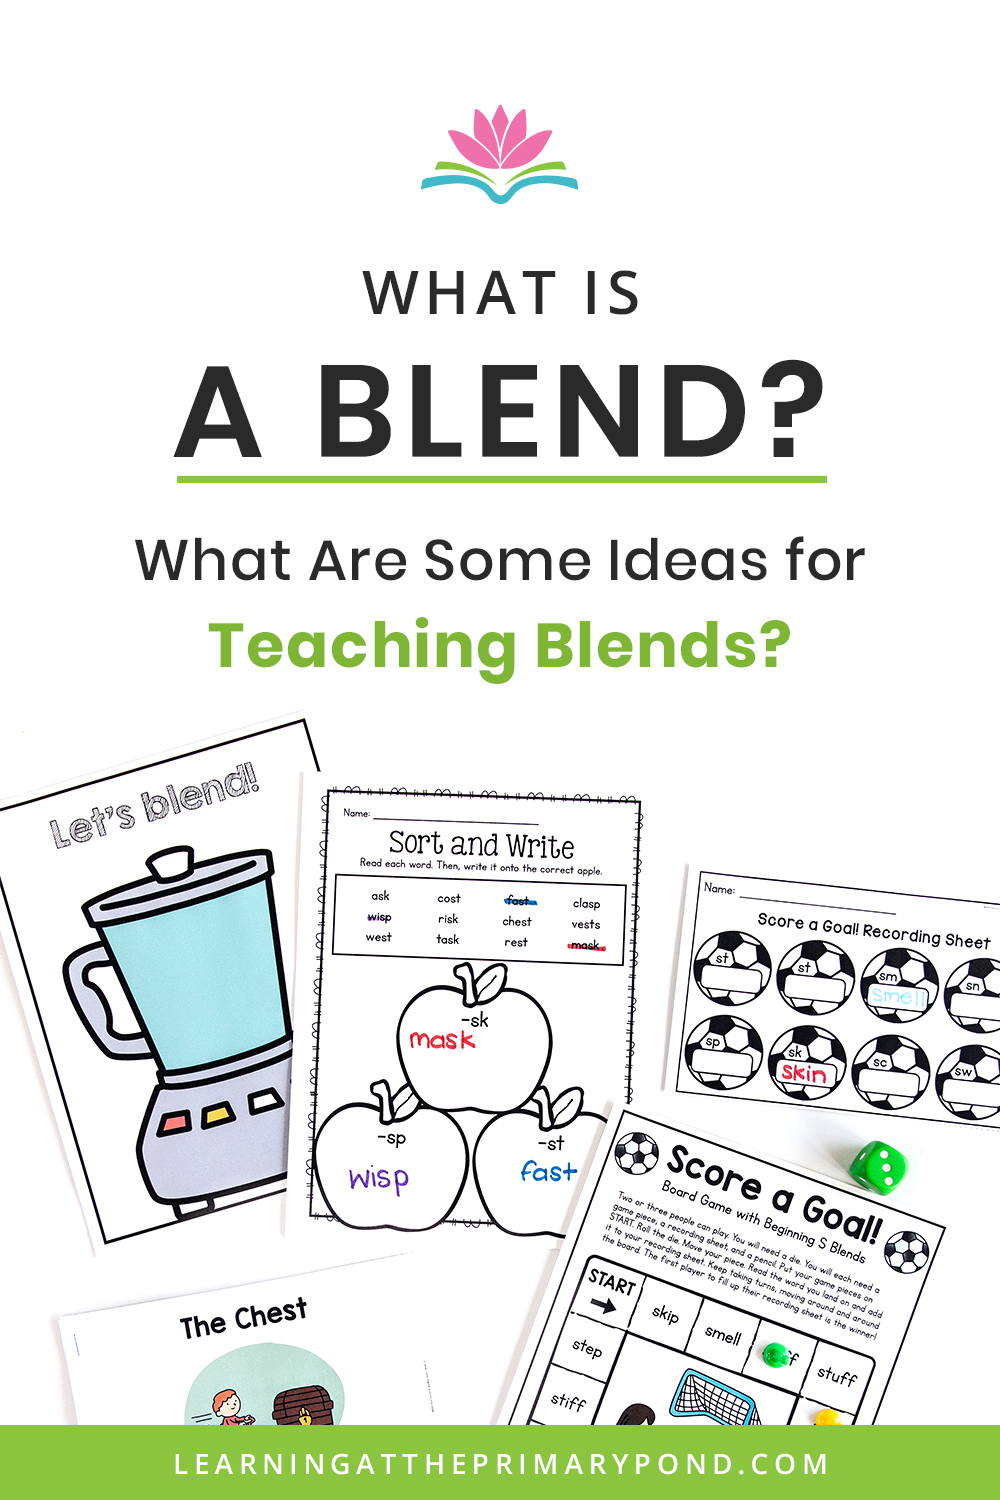 Blended Games for the classroom using YOUR content.